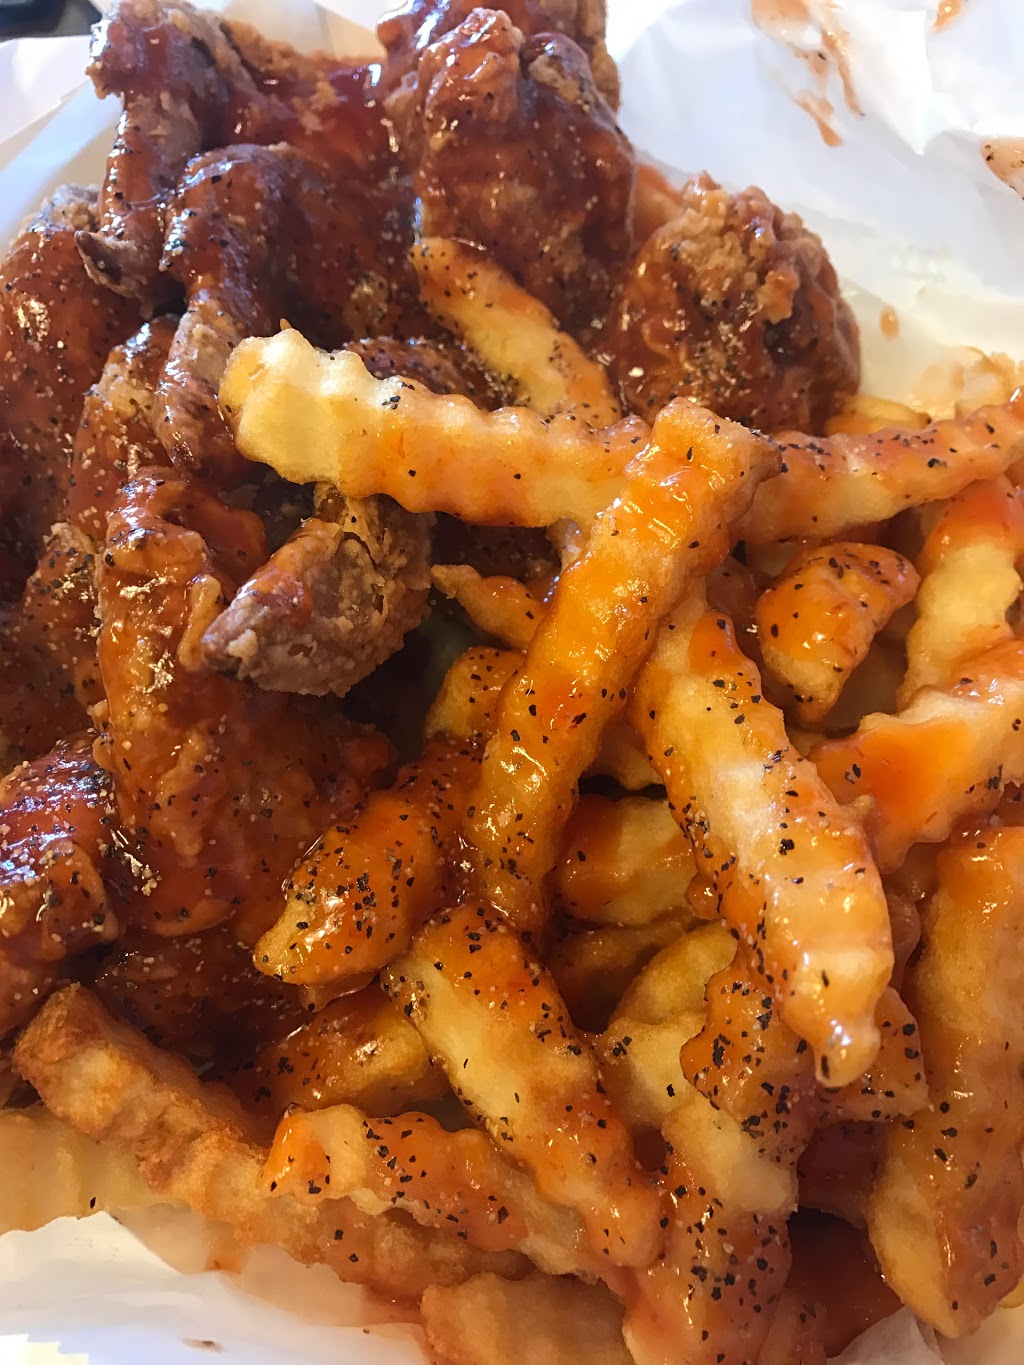 The Chicken Shack | 7920 S Western Ave, Chicago, IL 60620, USA | Phone: (773) 778-4500